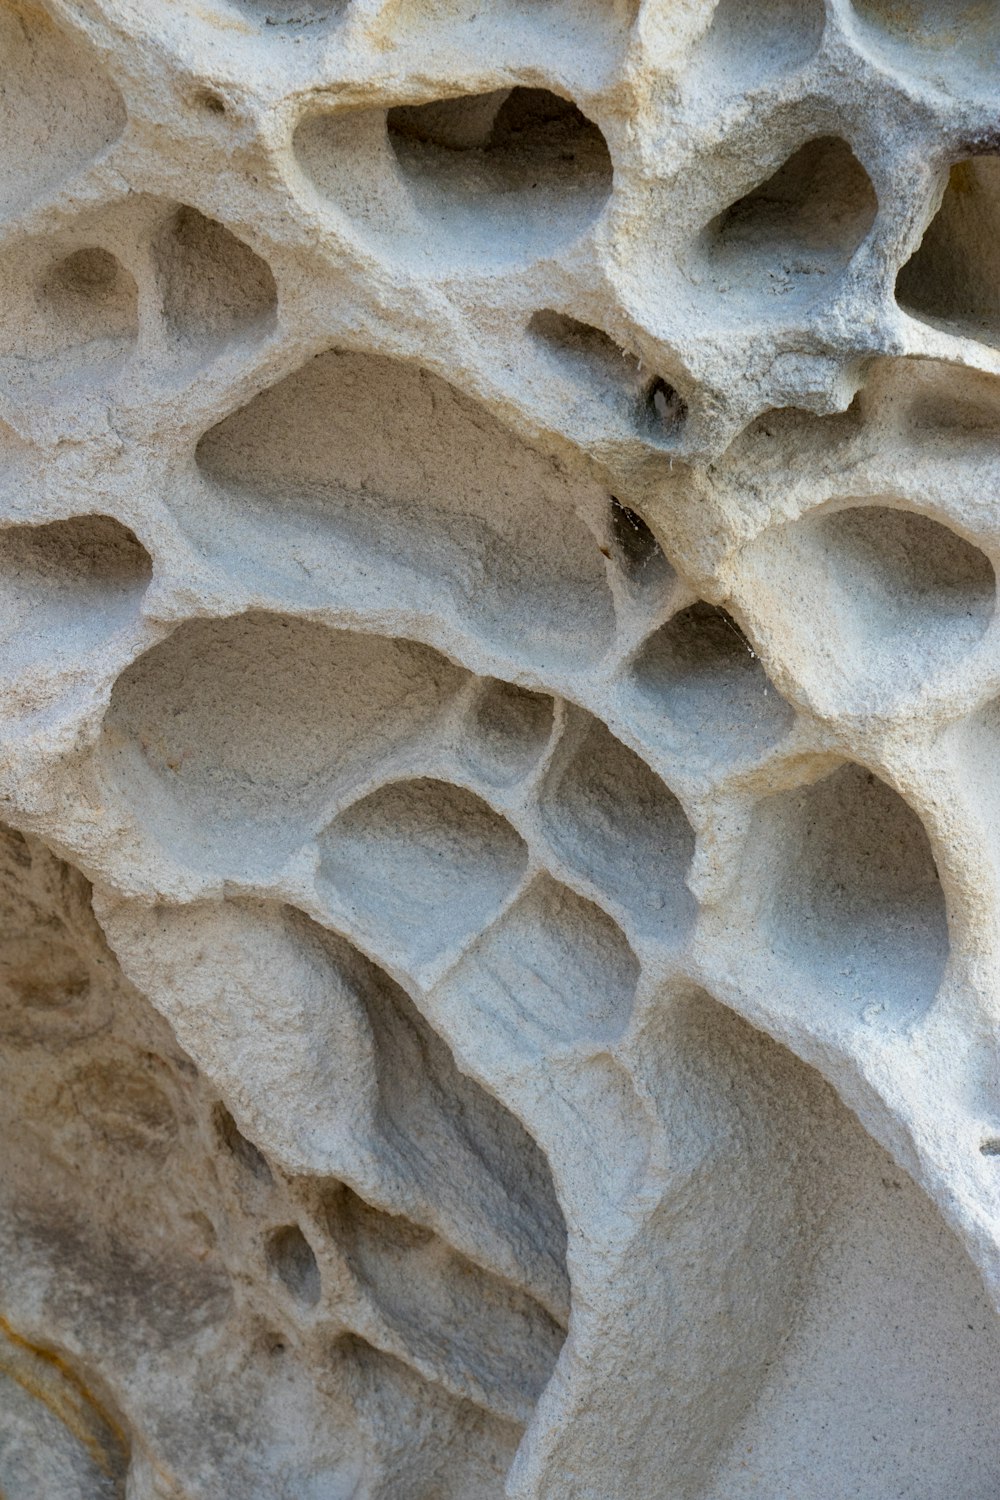 a close up of a rock formation with holes in it